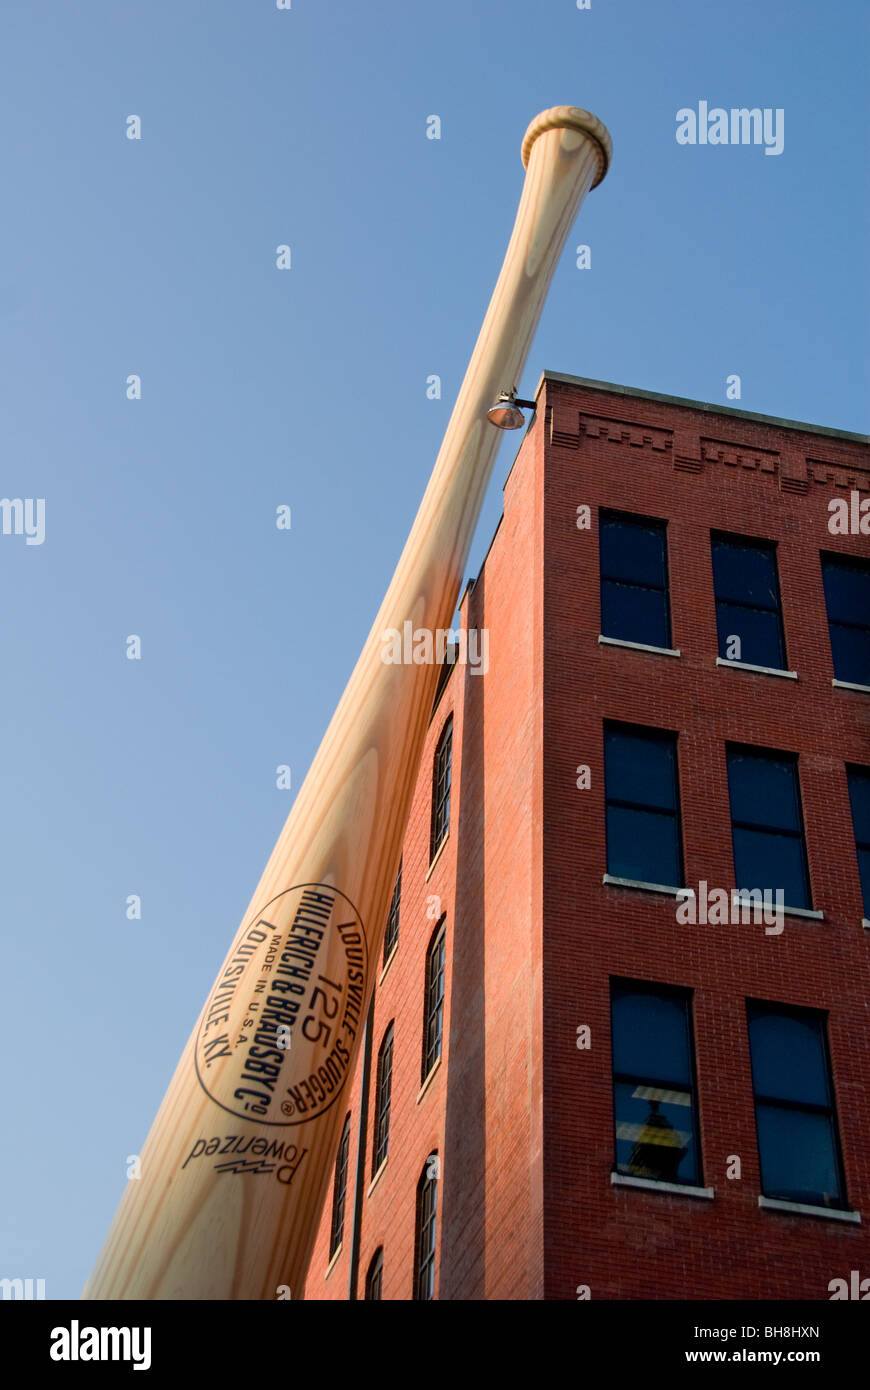 The Big Bat is a large scale replica of the bat designed for Babe Ruth in the 1920s in Louisville, Kentucky Stock Photo